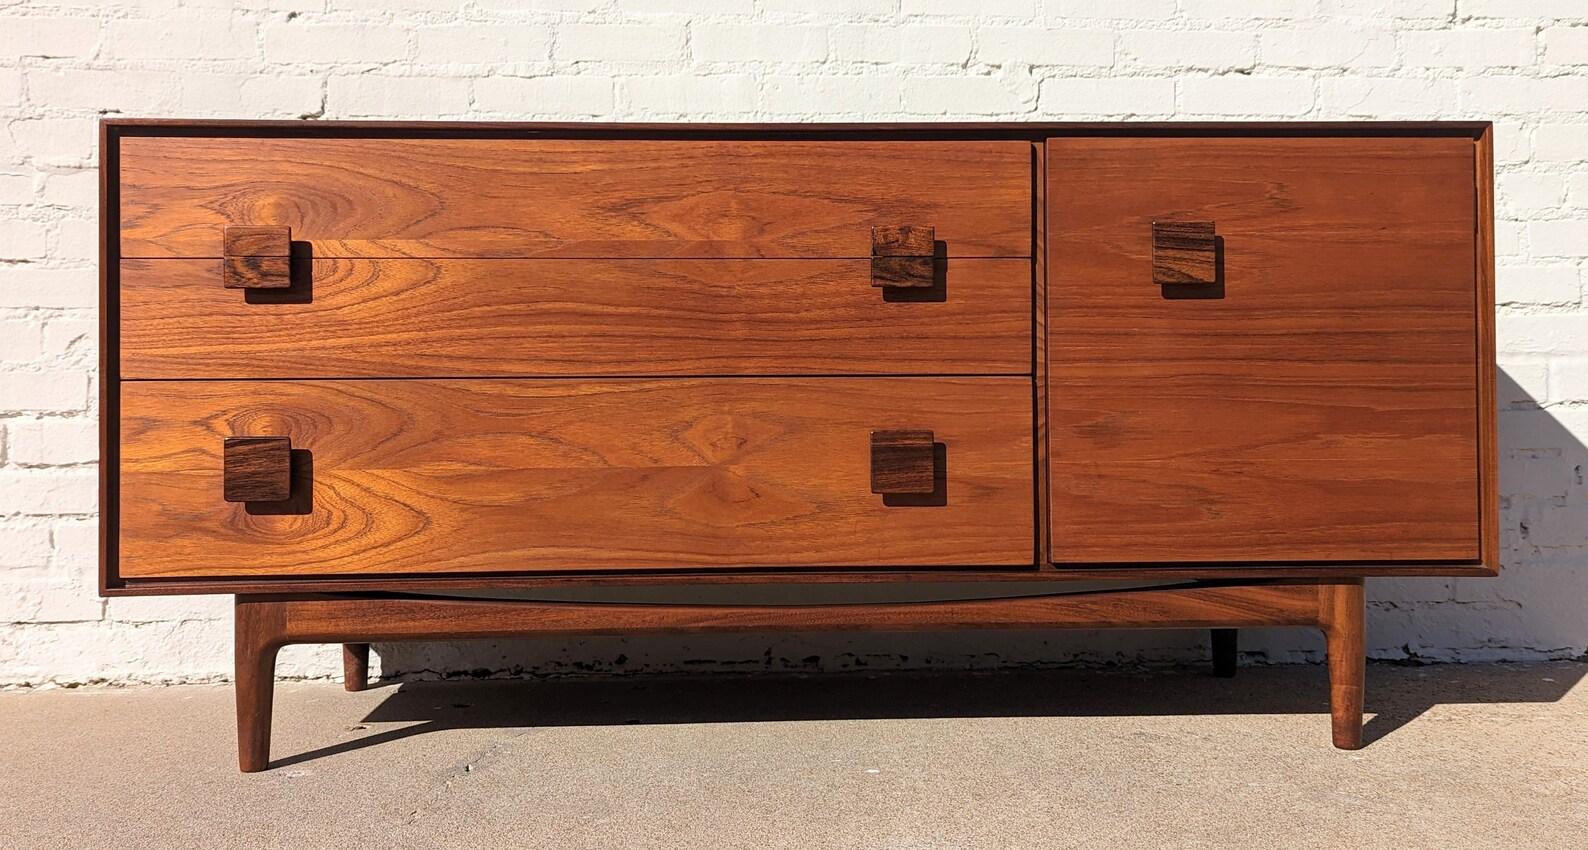 Mid Century Modern G Plan Credenza by Kofod Larsen
 
Above average vintage condition and structurally sound. Has some expected slight finish wear and scratching. Has a couple small dings and discolorations on top. Outdoor listing pictures might